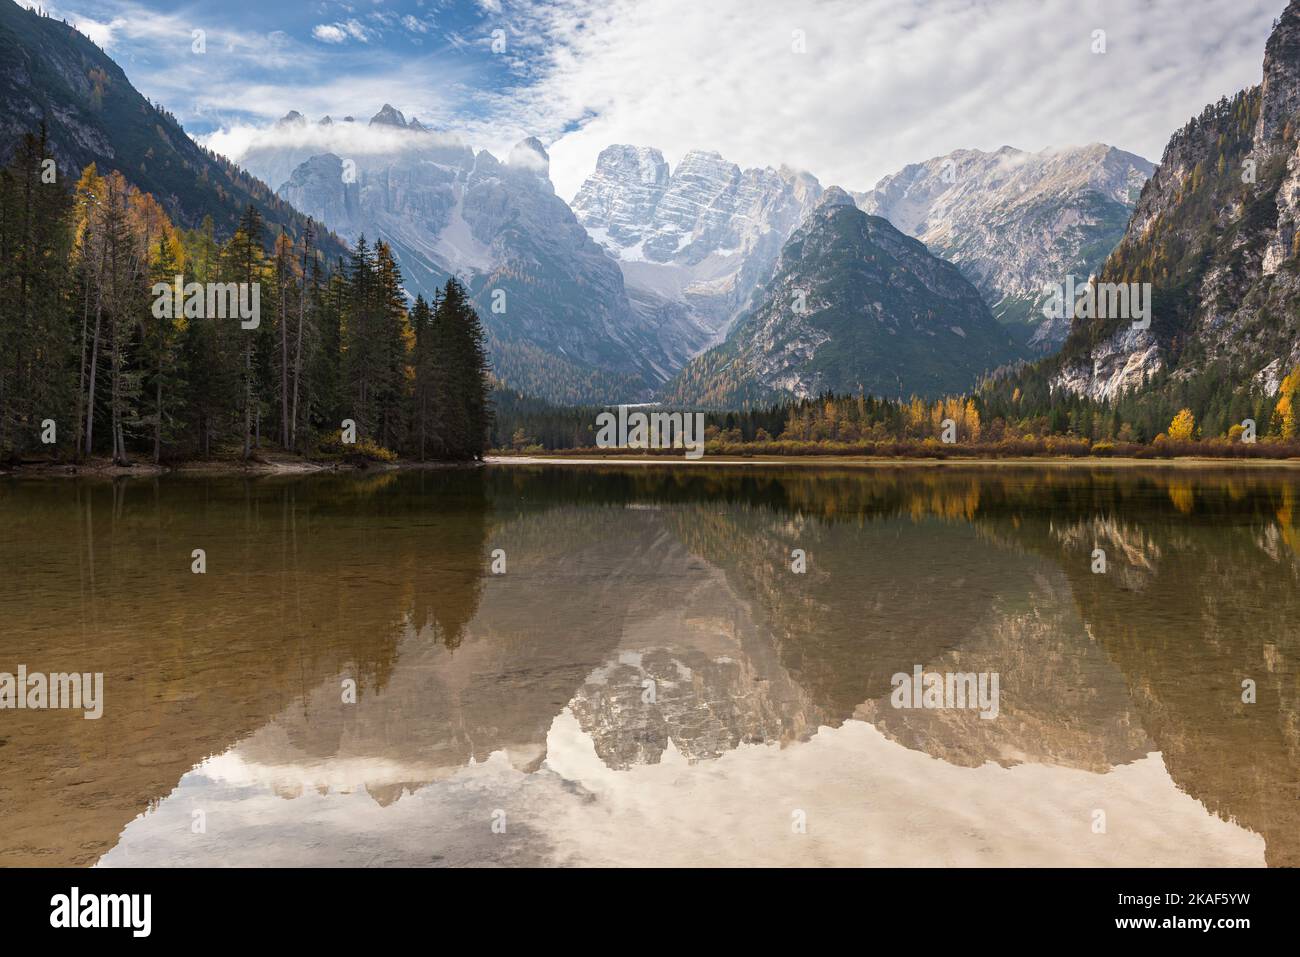 Reflection of the Cristallo mountain massif and autumnly colored mountain forests in Lake Dürren,South Tyrol, Italy Stock Photo